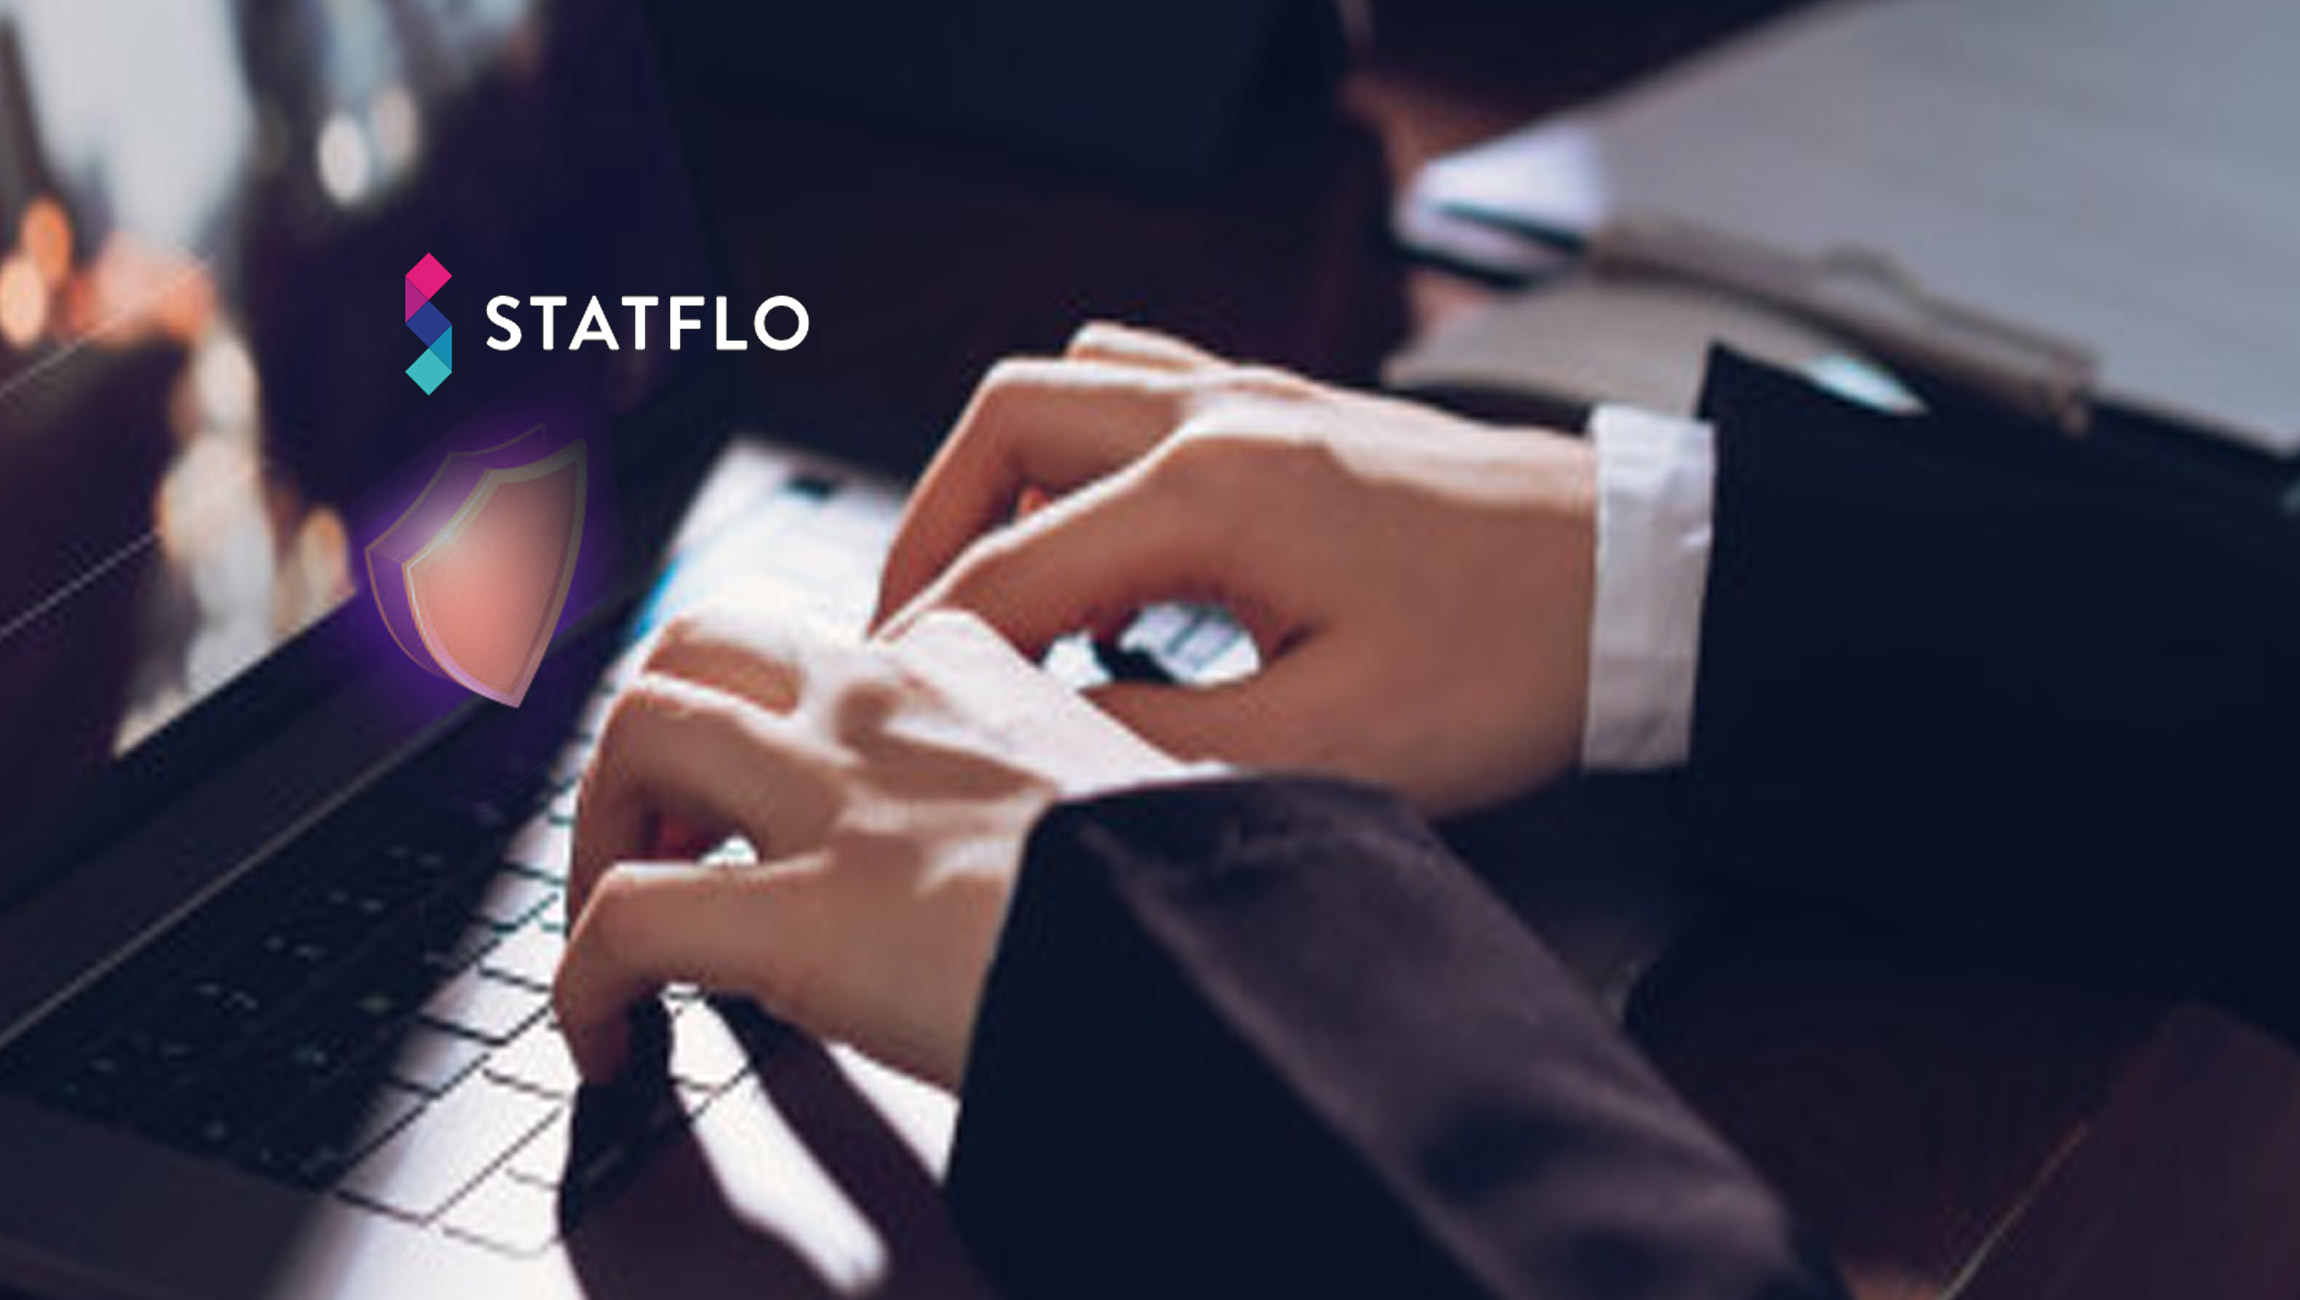 Statflo launches TextKit, a flexible and secure business text messaging platform for customer-facing teams